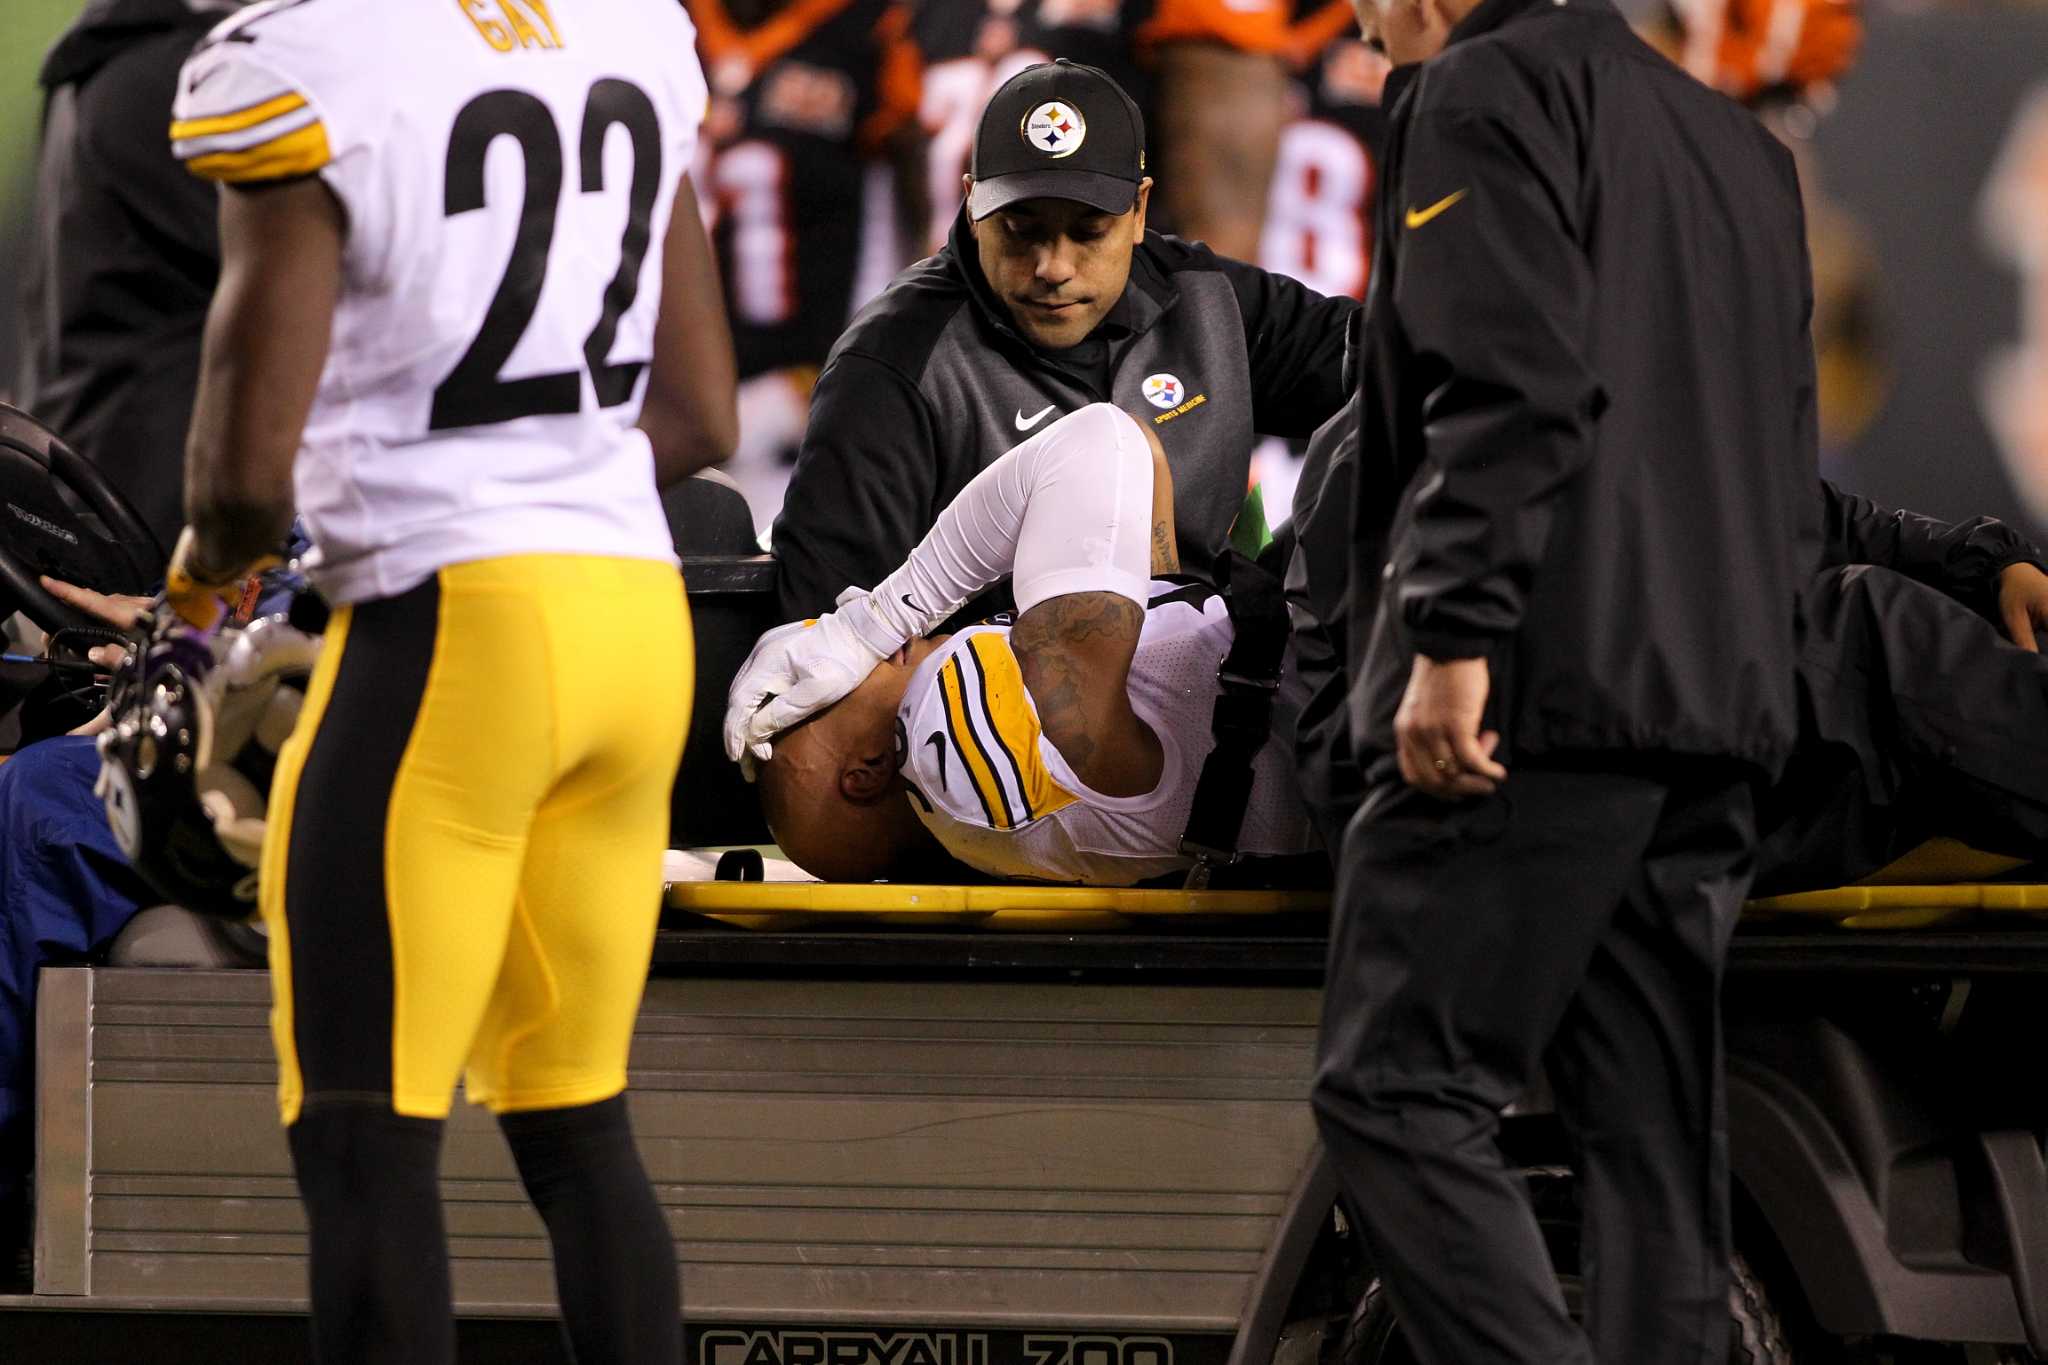 Scary injury to Steelers' Ryan Shazier reminds Texans of sport's violence,  risk